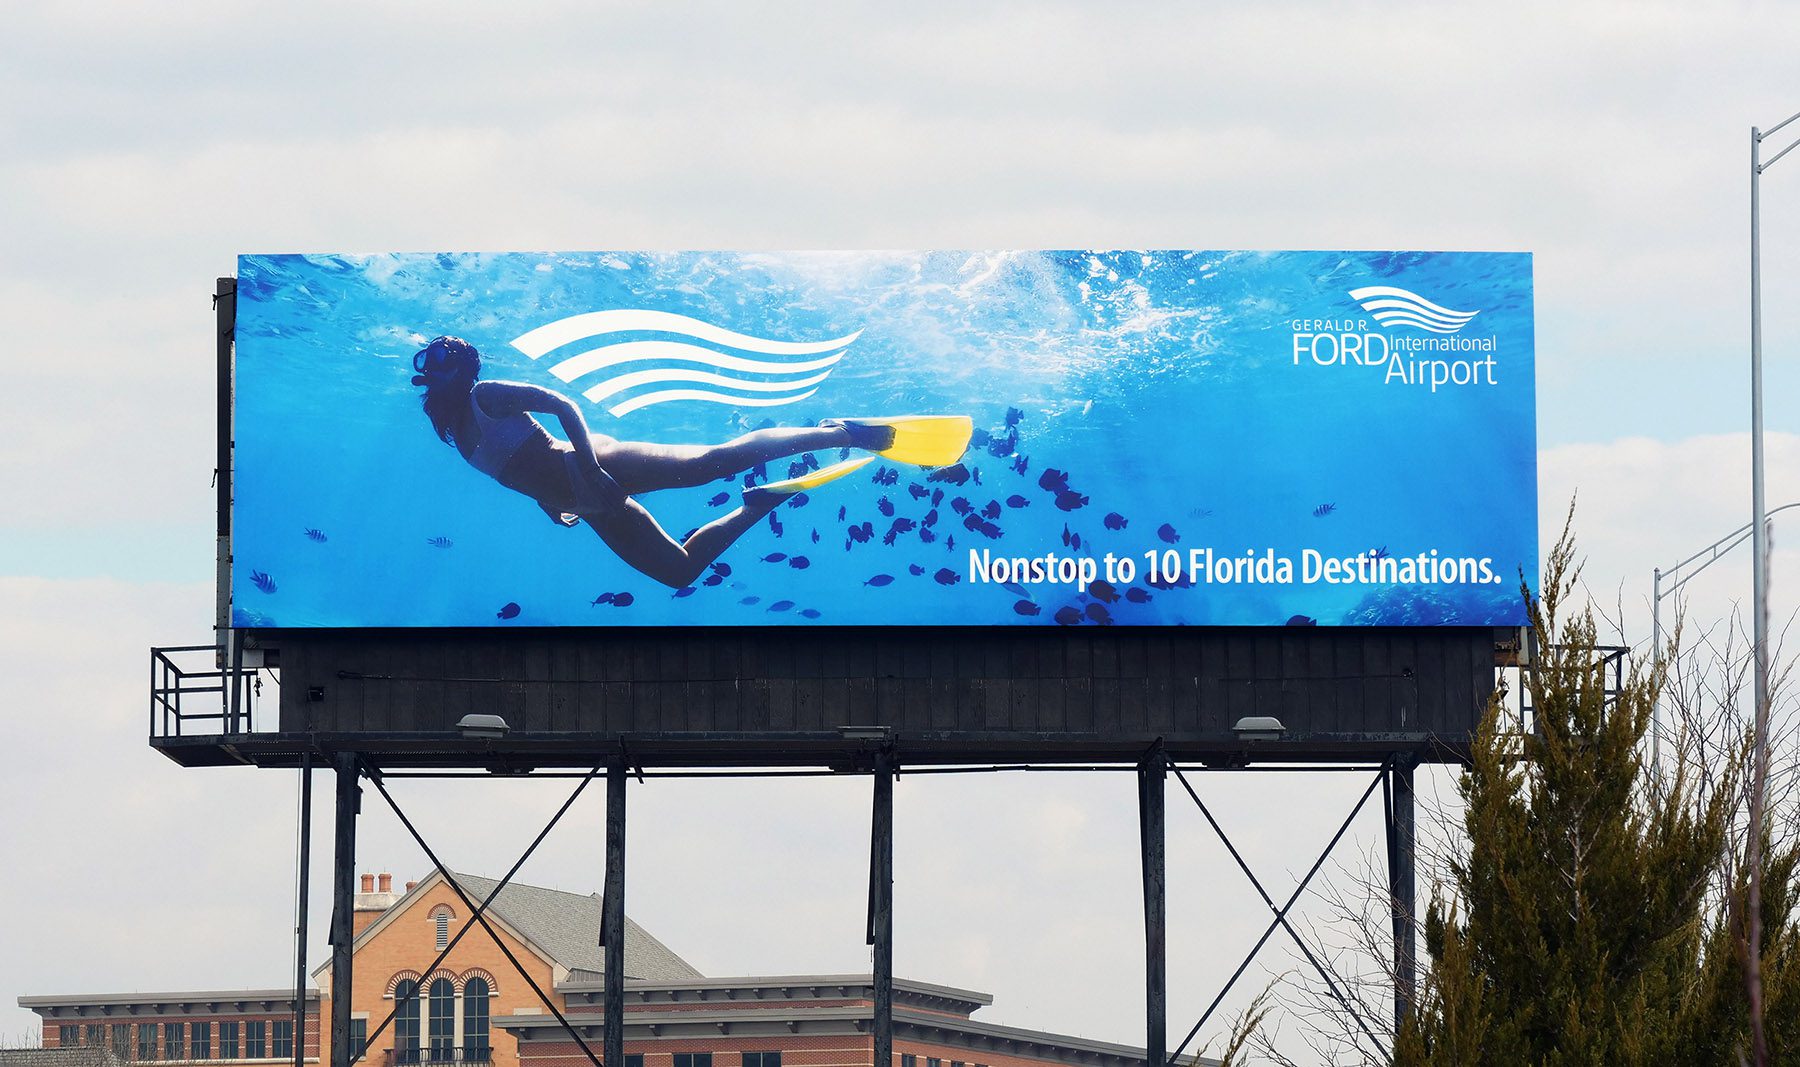 Out of home brand campaign for Gerald R. Ford International Airport. Nonstop to 10 Florida Destinations